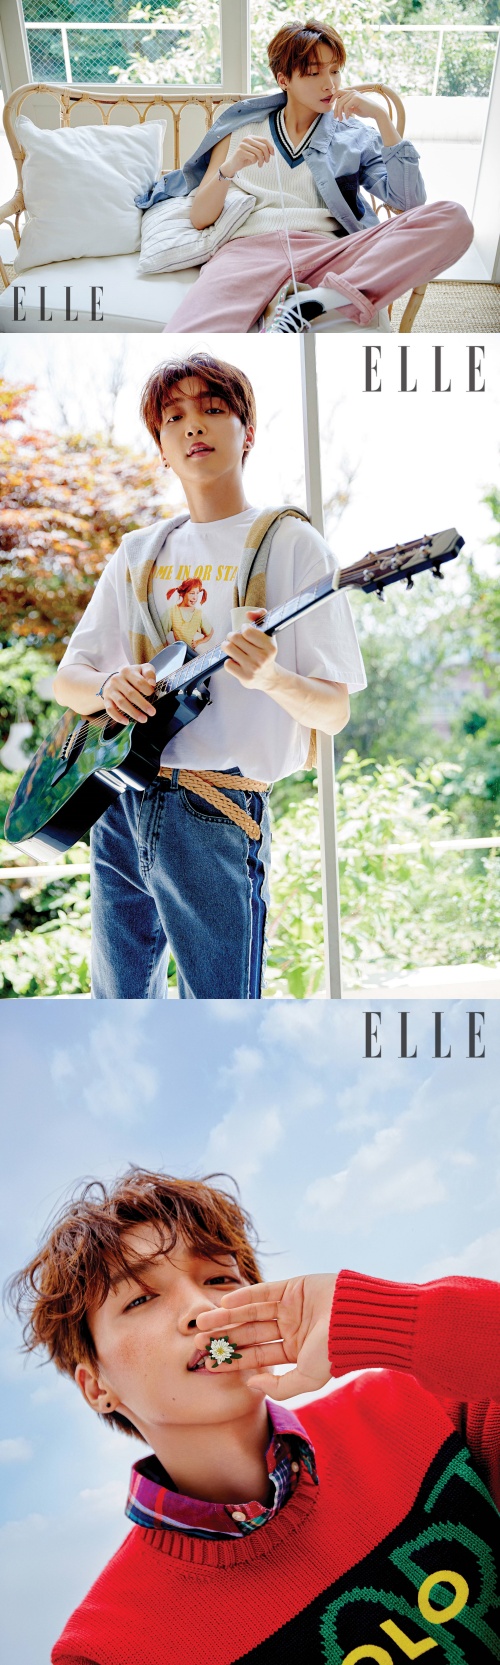 Summer pictorial by Singer Jeong Se-woon has been released.On Friday, Starship Entertainment released a picture of Jeong Se-woon with Elle (ELLE).Jeong Se-woon showed off his extraordinary visuals, delightfully expressing the hot Summer afternoon languidness.Every time the look changed, the elasticity of the field staff continued in the appearance of the Jeong Se-woon, who created a fantastic picture by being attracted to the concept.Jeong Se-woon showed off the aspect of the artist, especially in the perfect pose, with the outdoor shooting firmly in the hot weather on the day of shooting the picture.Summer afternoon freckle makeup, which was directed to express the languidness of the afternoon, also showed off the perfect Nude Me.In the interview, he said that he established his identity between idol and singer-songwriter, and expressed his affection for the nickname of fans called Singer Song Ridol.More pictorials and interviews by Jeong Se-woon can be found in the August issue of Elle (ELLE).